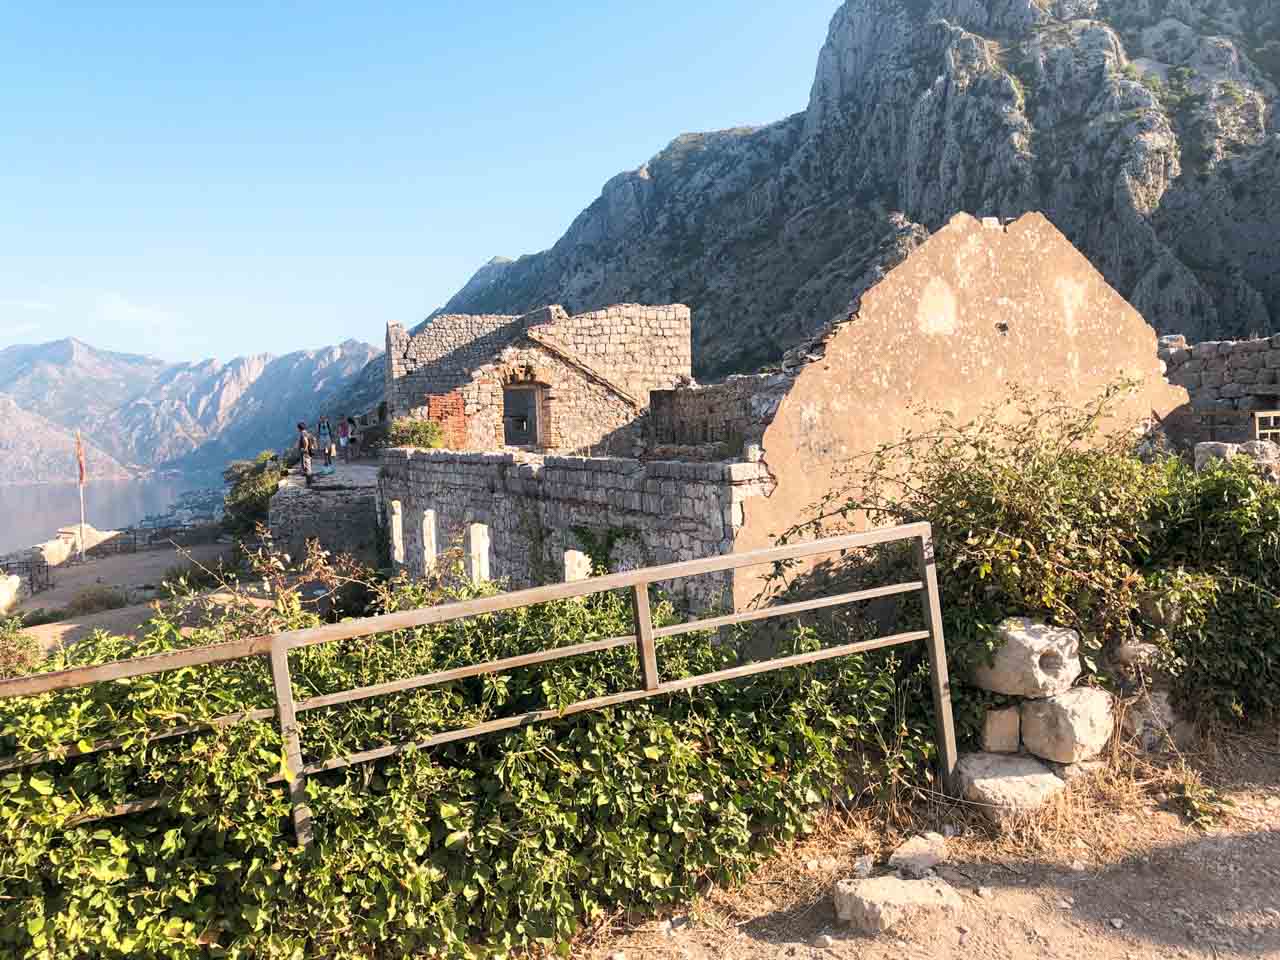 Ruins of a stone house on the way to the San Giovanni Fortress in Kotor, Montenegro